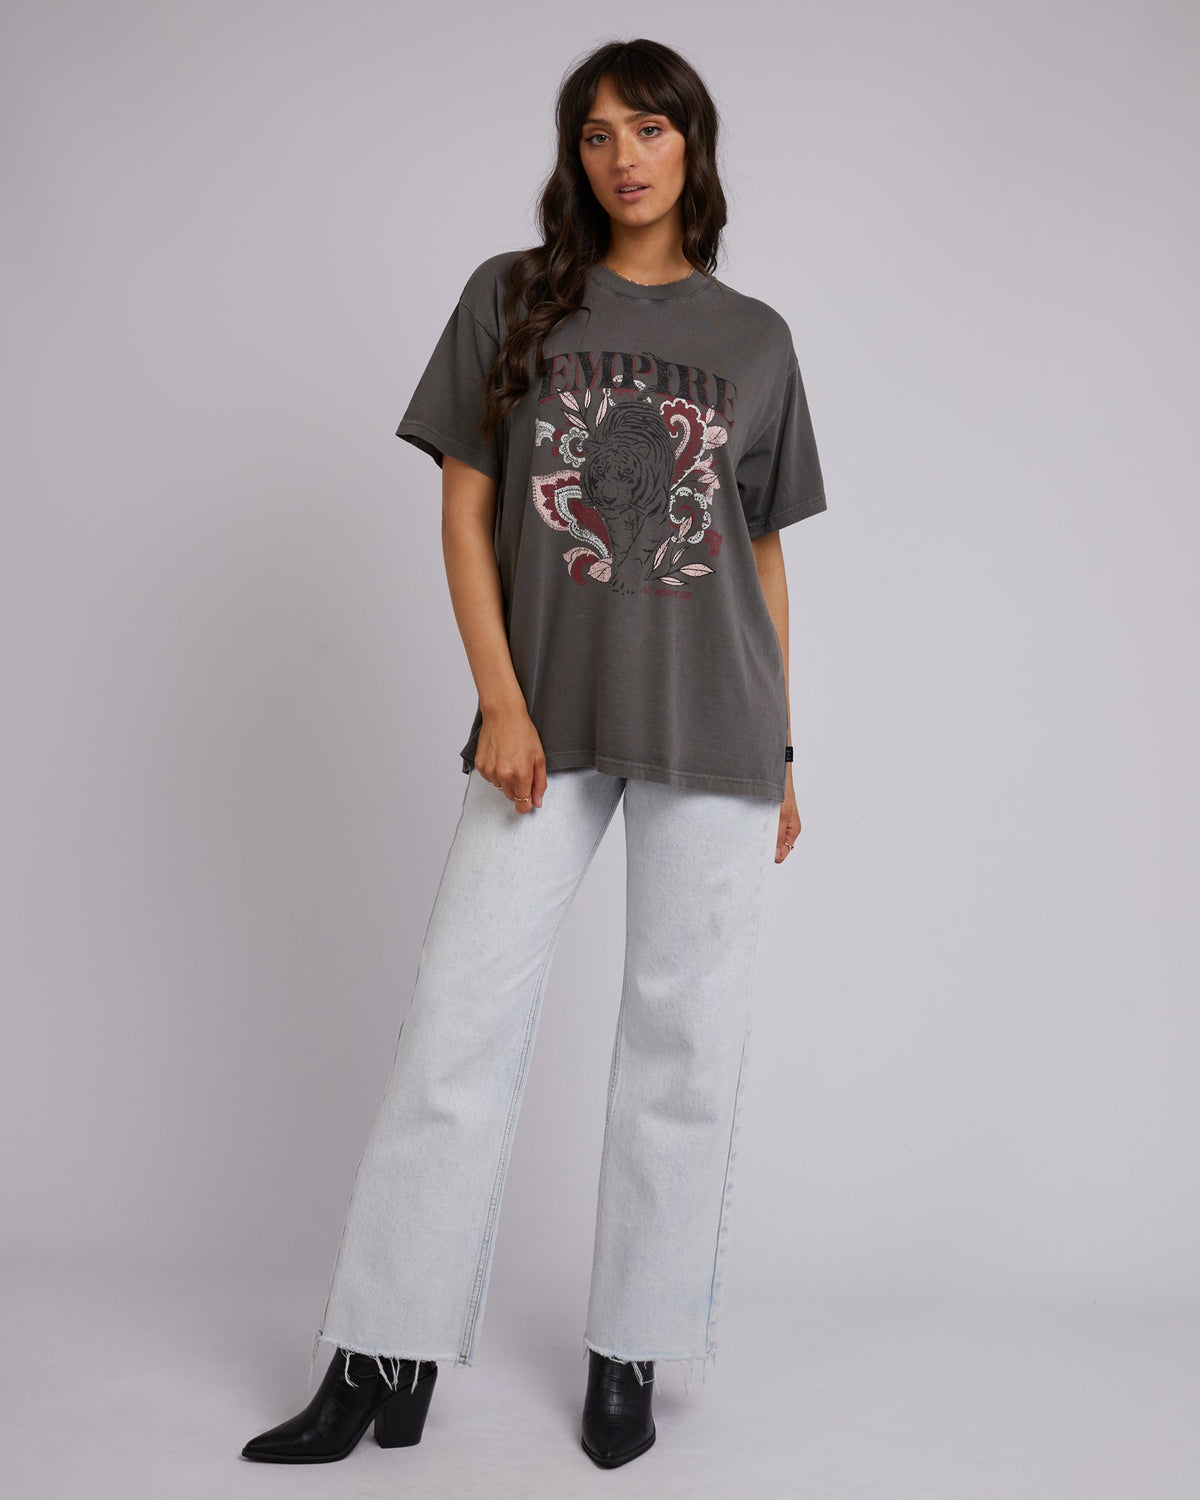 All About Eve-Empire Oversized Tee Charcoal-Edge Clothing